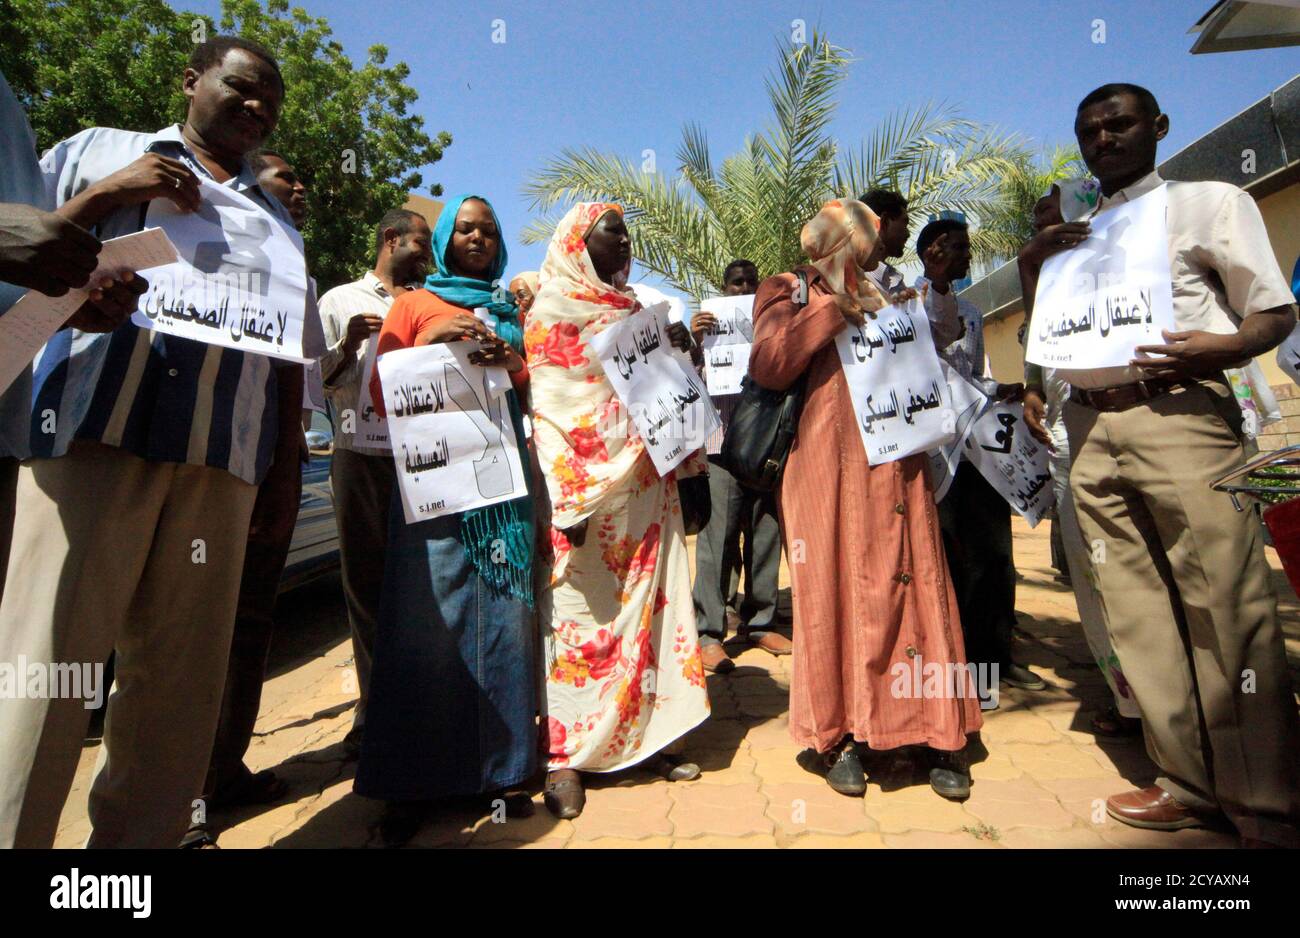 Sudanese journalists carrying placards protest against the week-long arrest  of Darfuri journalist Jaafer Al-Sibki outside the Press and Publications  Council in Khartoum November 10, 2010. Al-Sibki was arrested as part of a